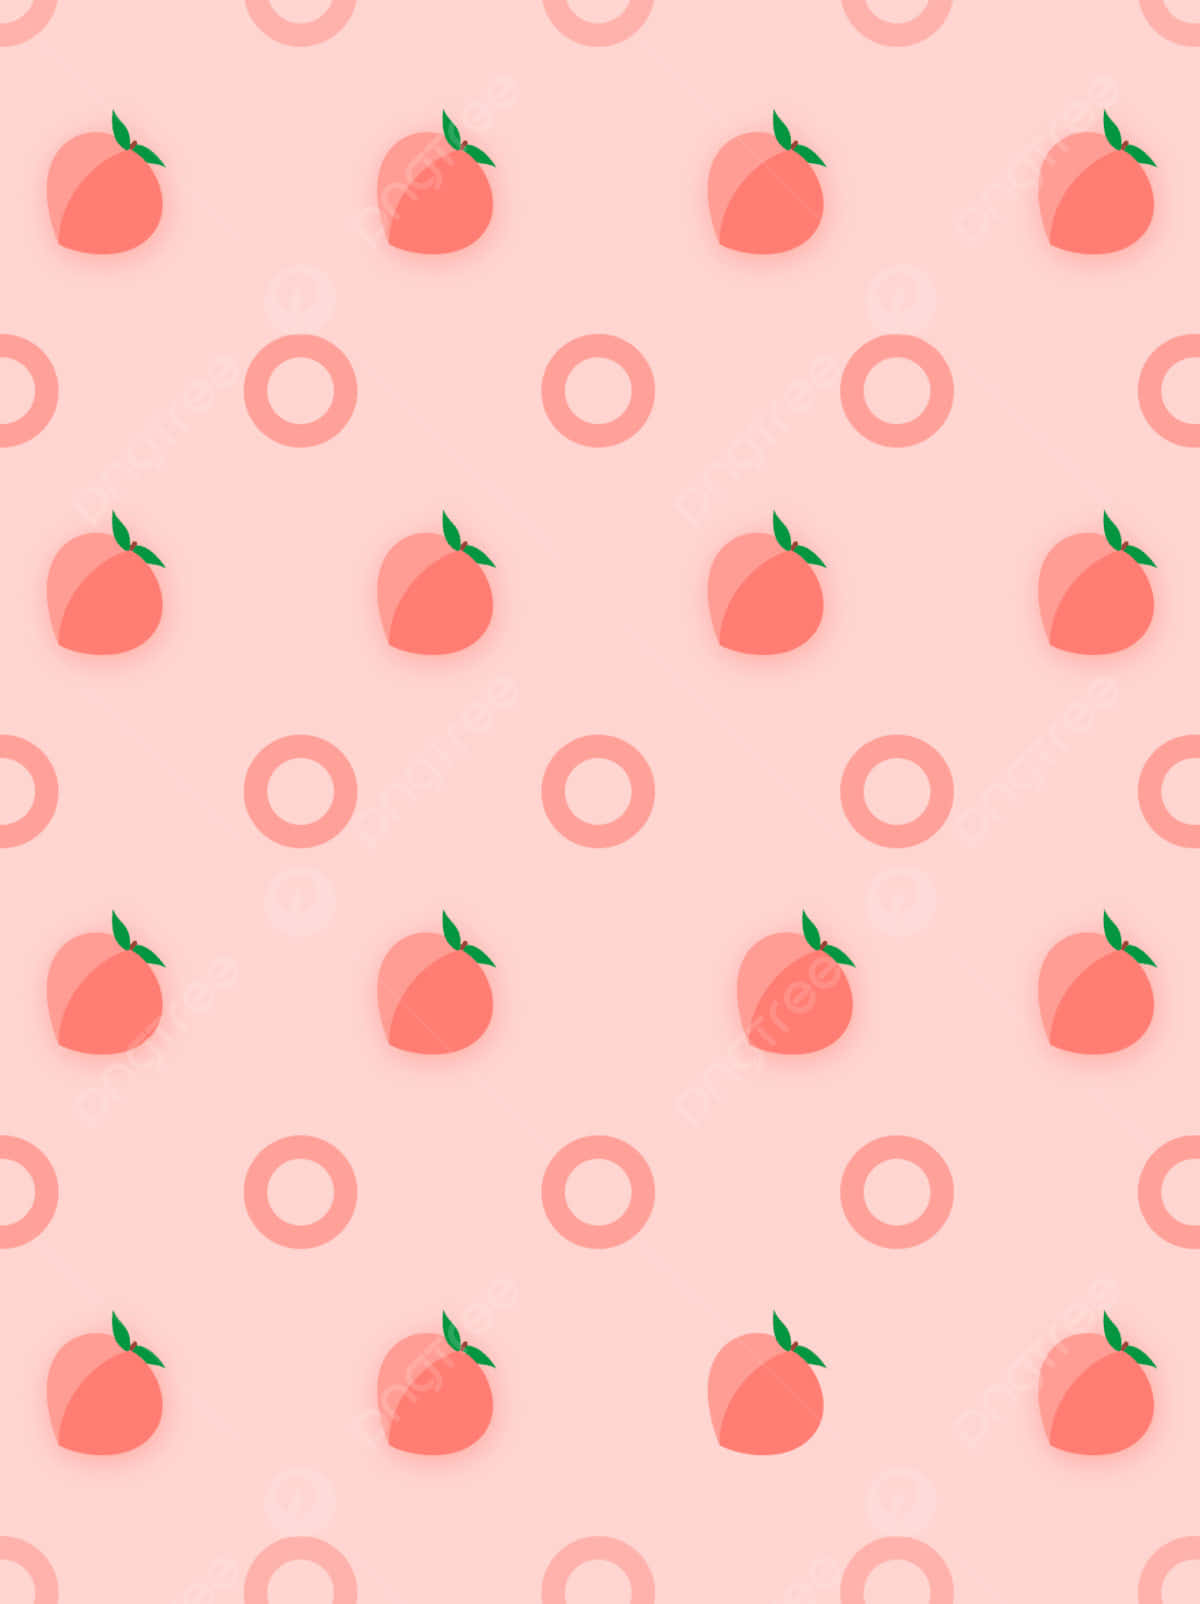 A sweet and lovely peach fruit that looks good enough to eat! Wallpaper